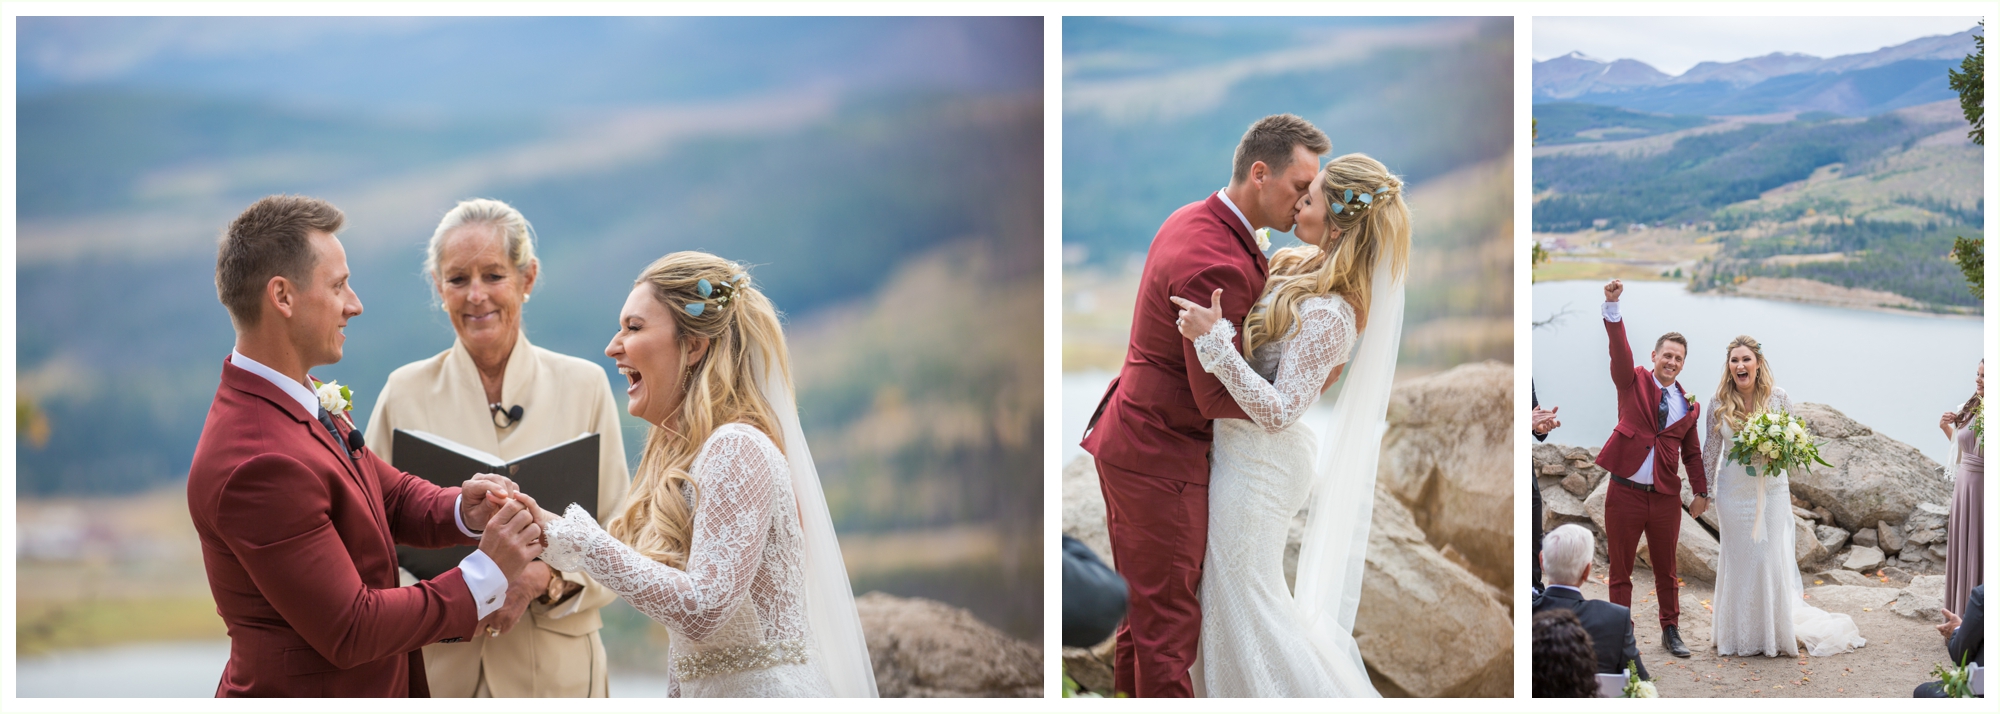 bride and groom share first kiss during sapphire point elopement in september breckenridge colorado